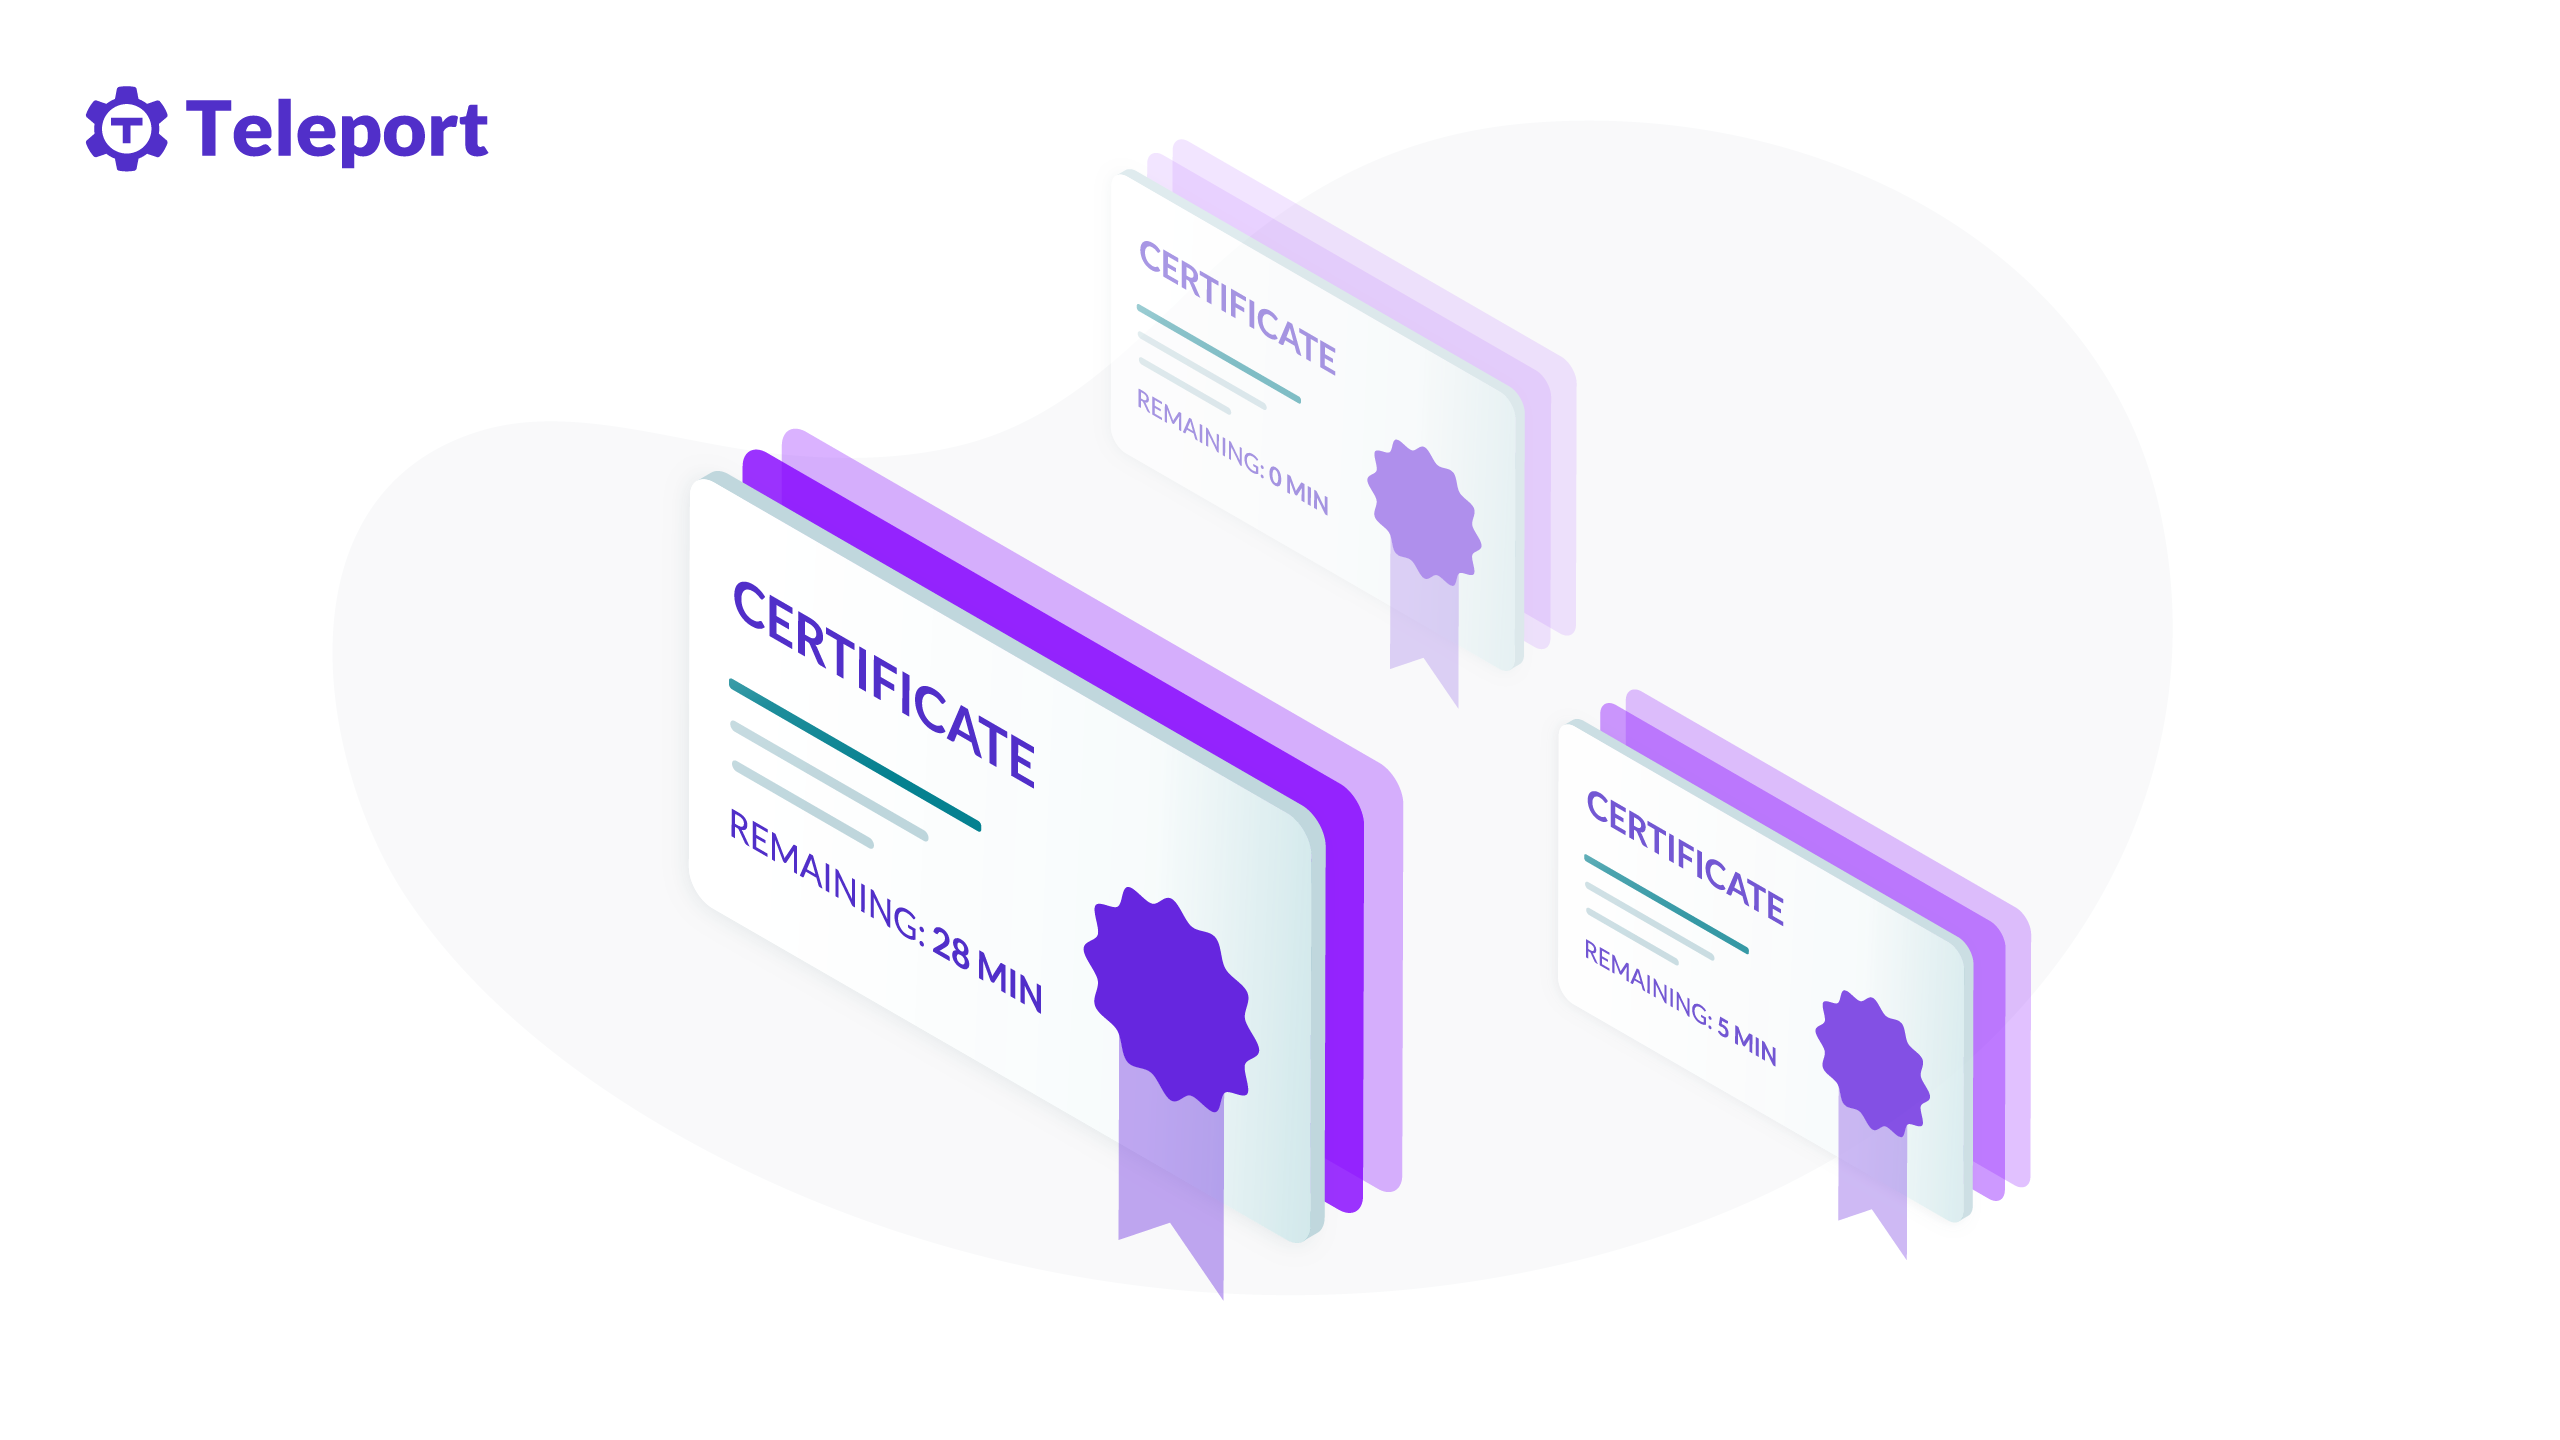 Certificate-based authentication best practices